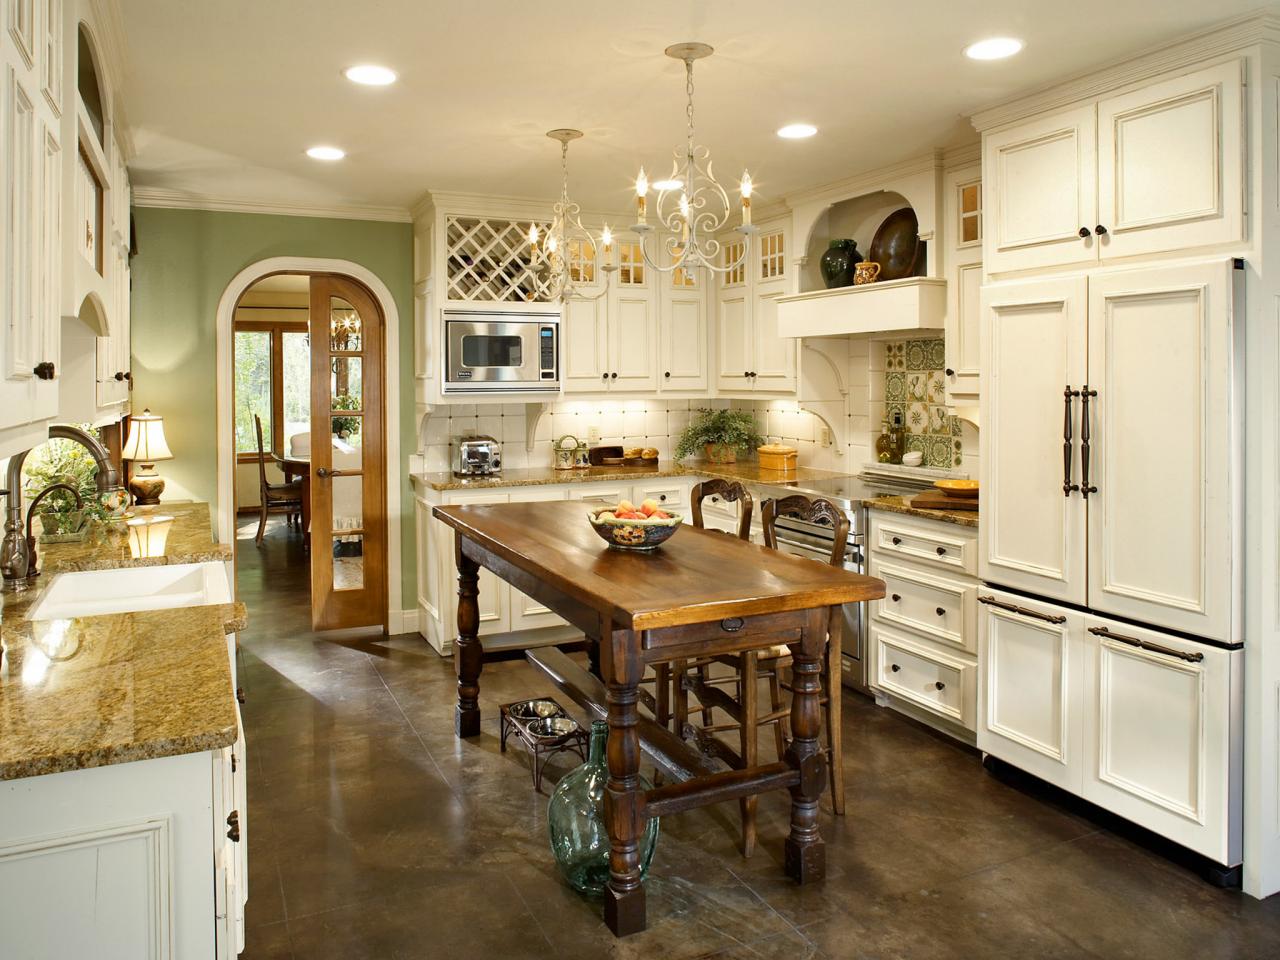 20 Things to consider before making French country kitchen wall tiles